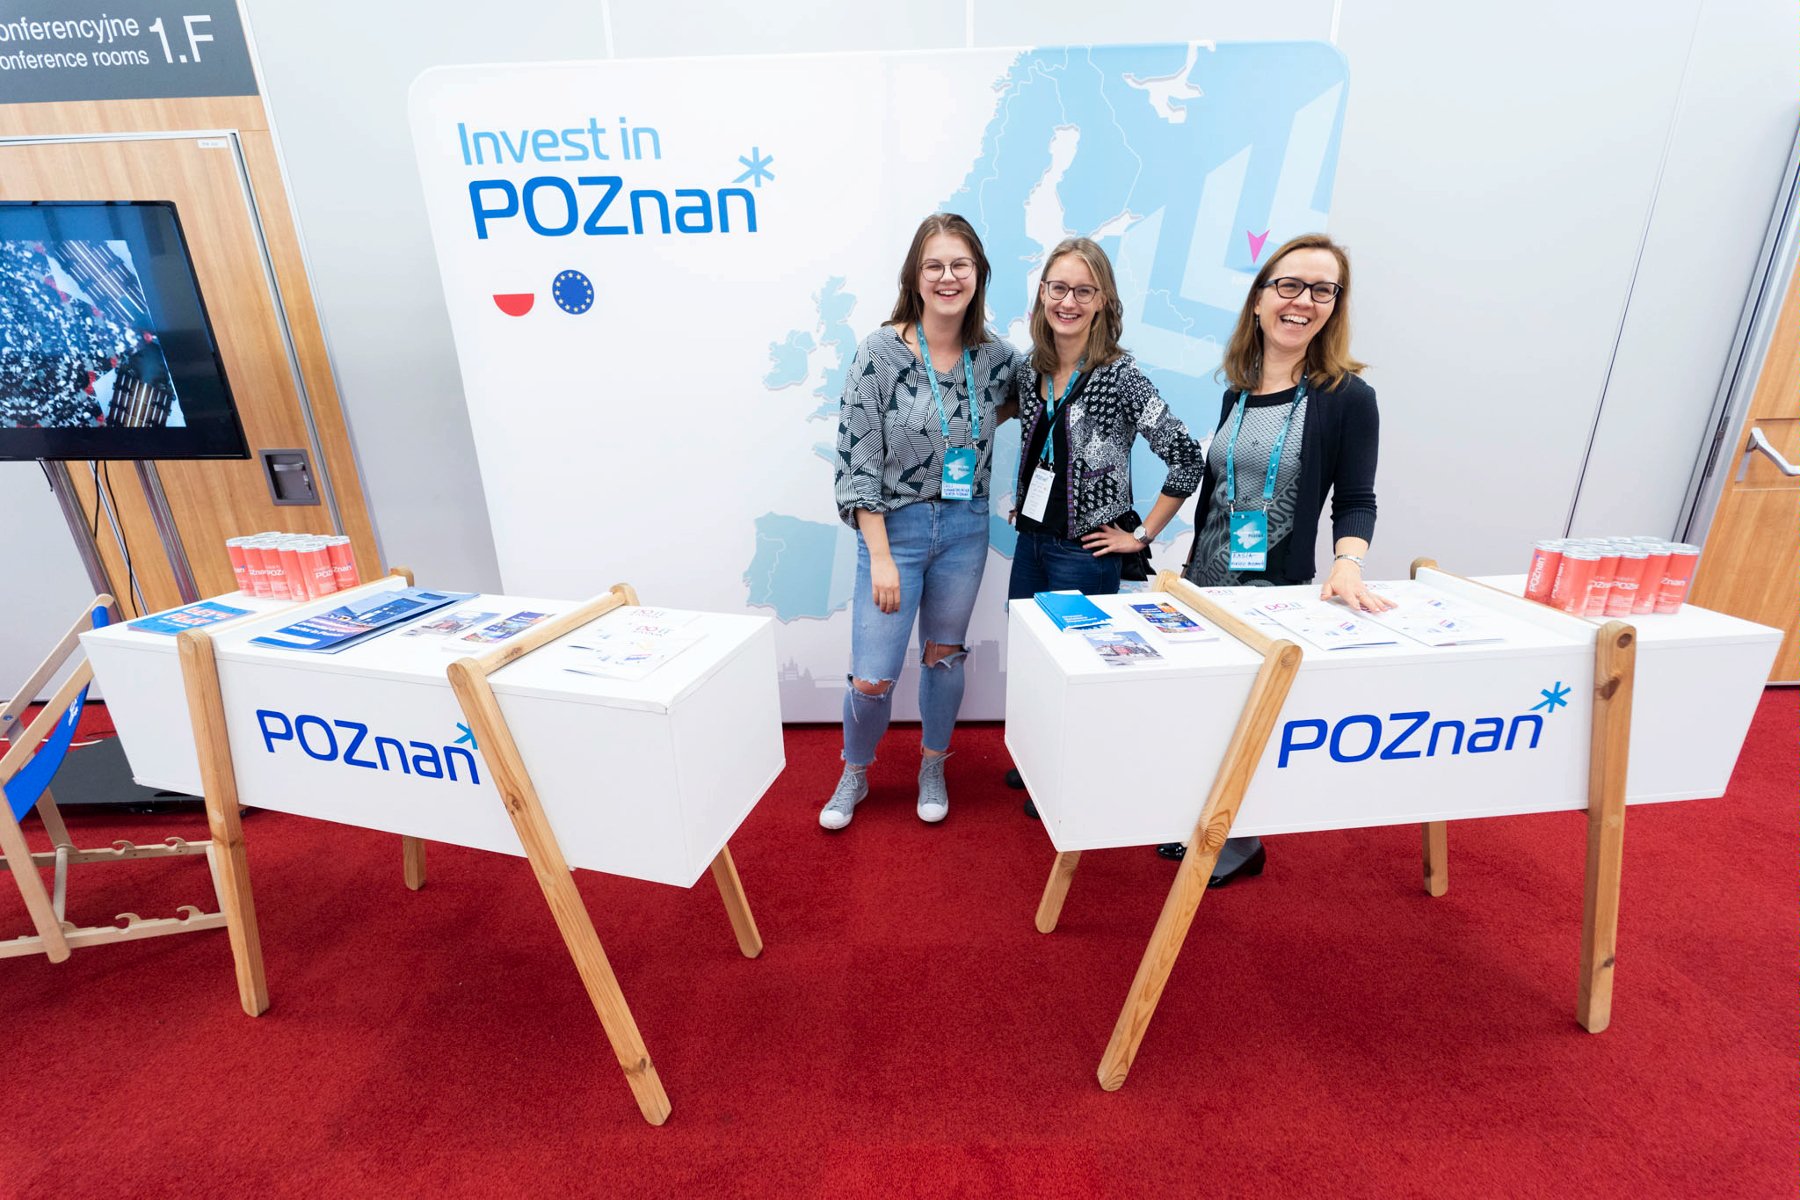 The stand of the City of Poznań during the 1st edition of the Pozitive Technologies conference, 2019